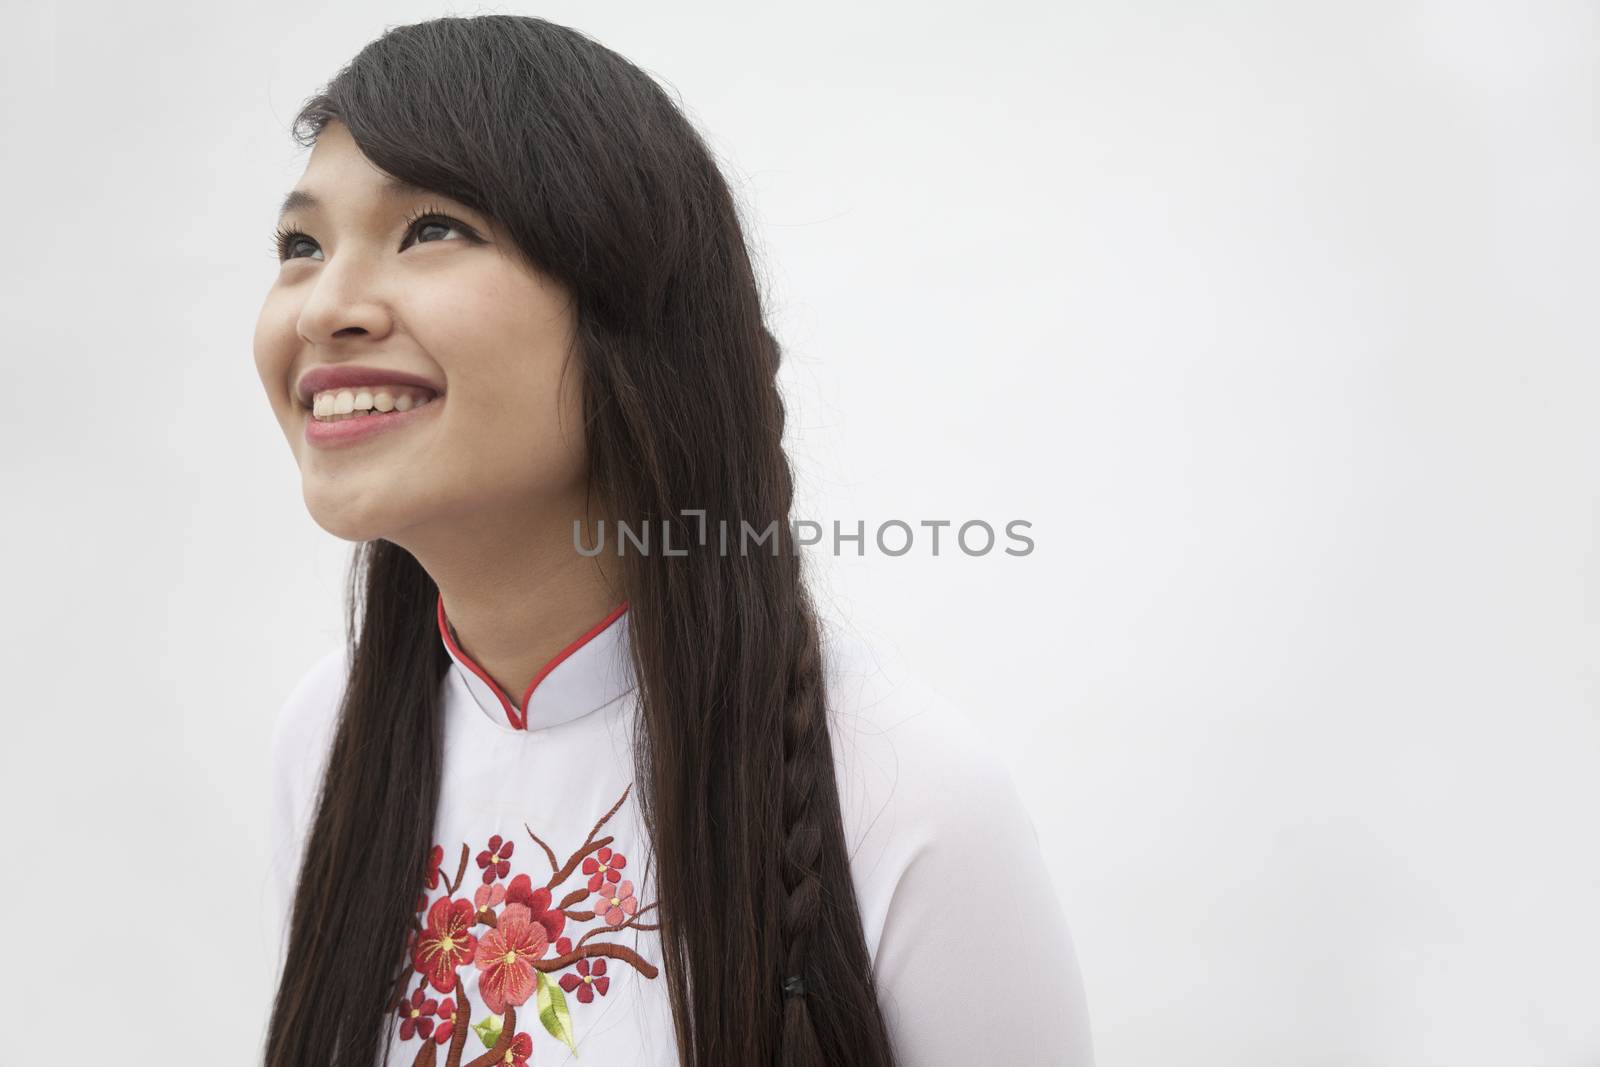 Portrait of smiling young woman with long hair wearing a traditional dress from Vietnam, studio shot